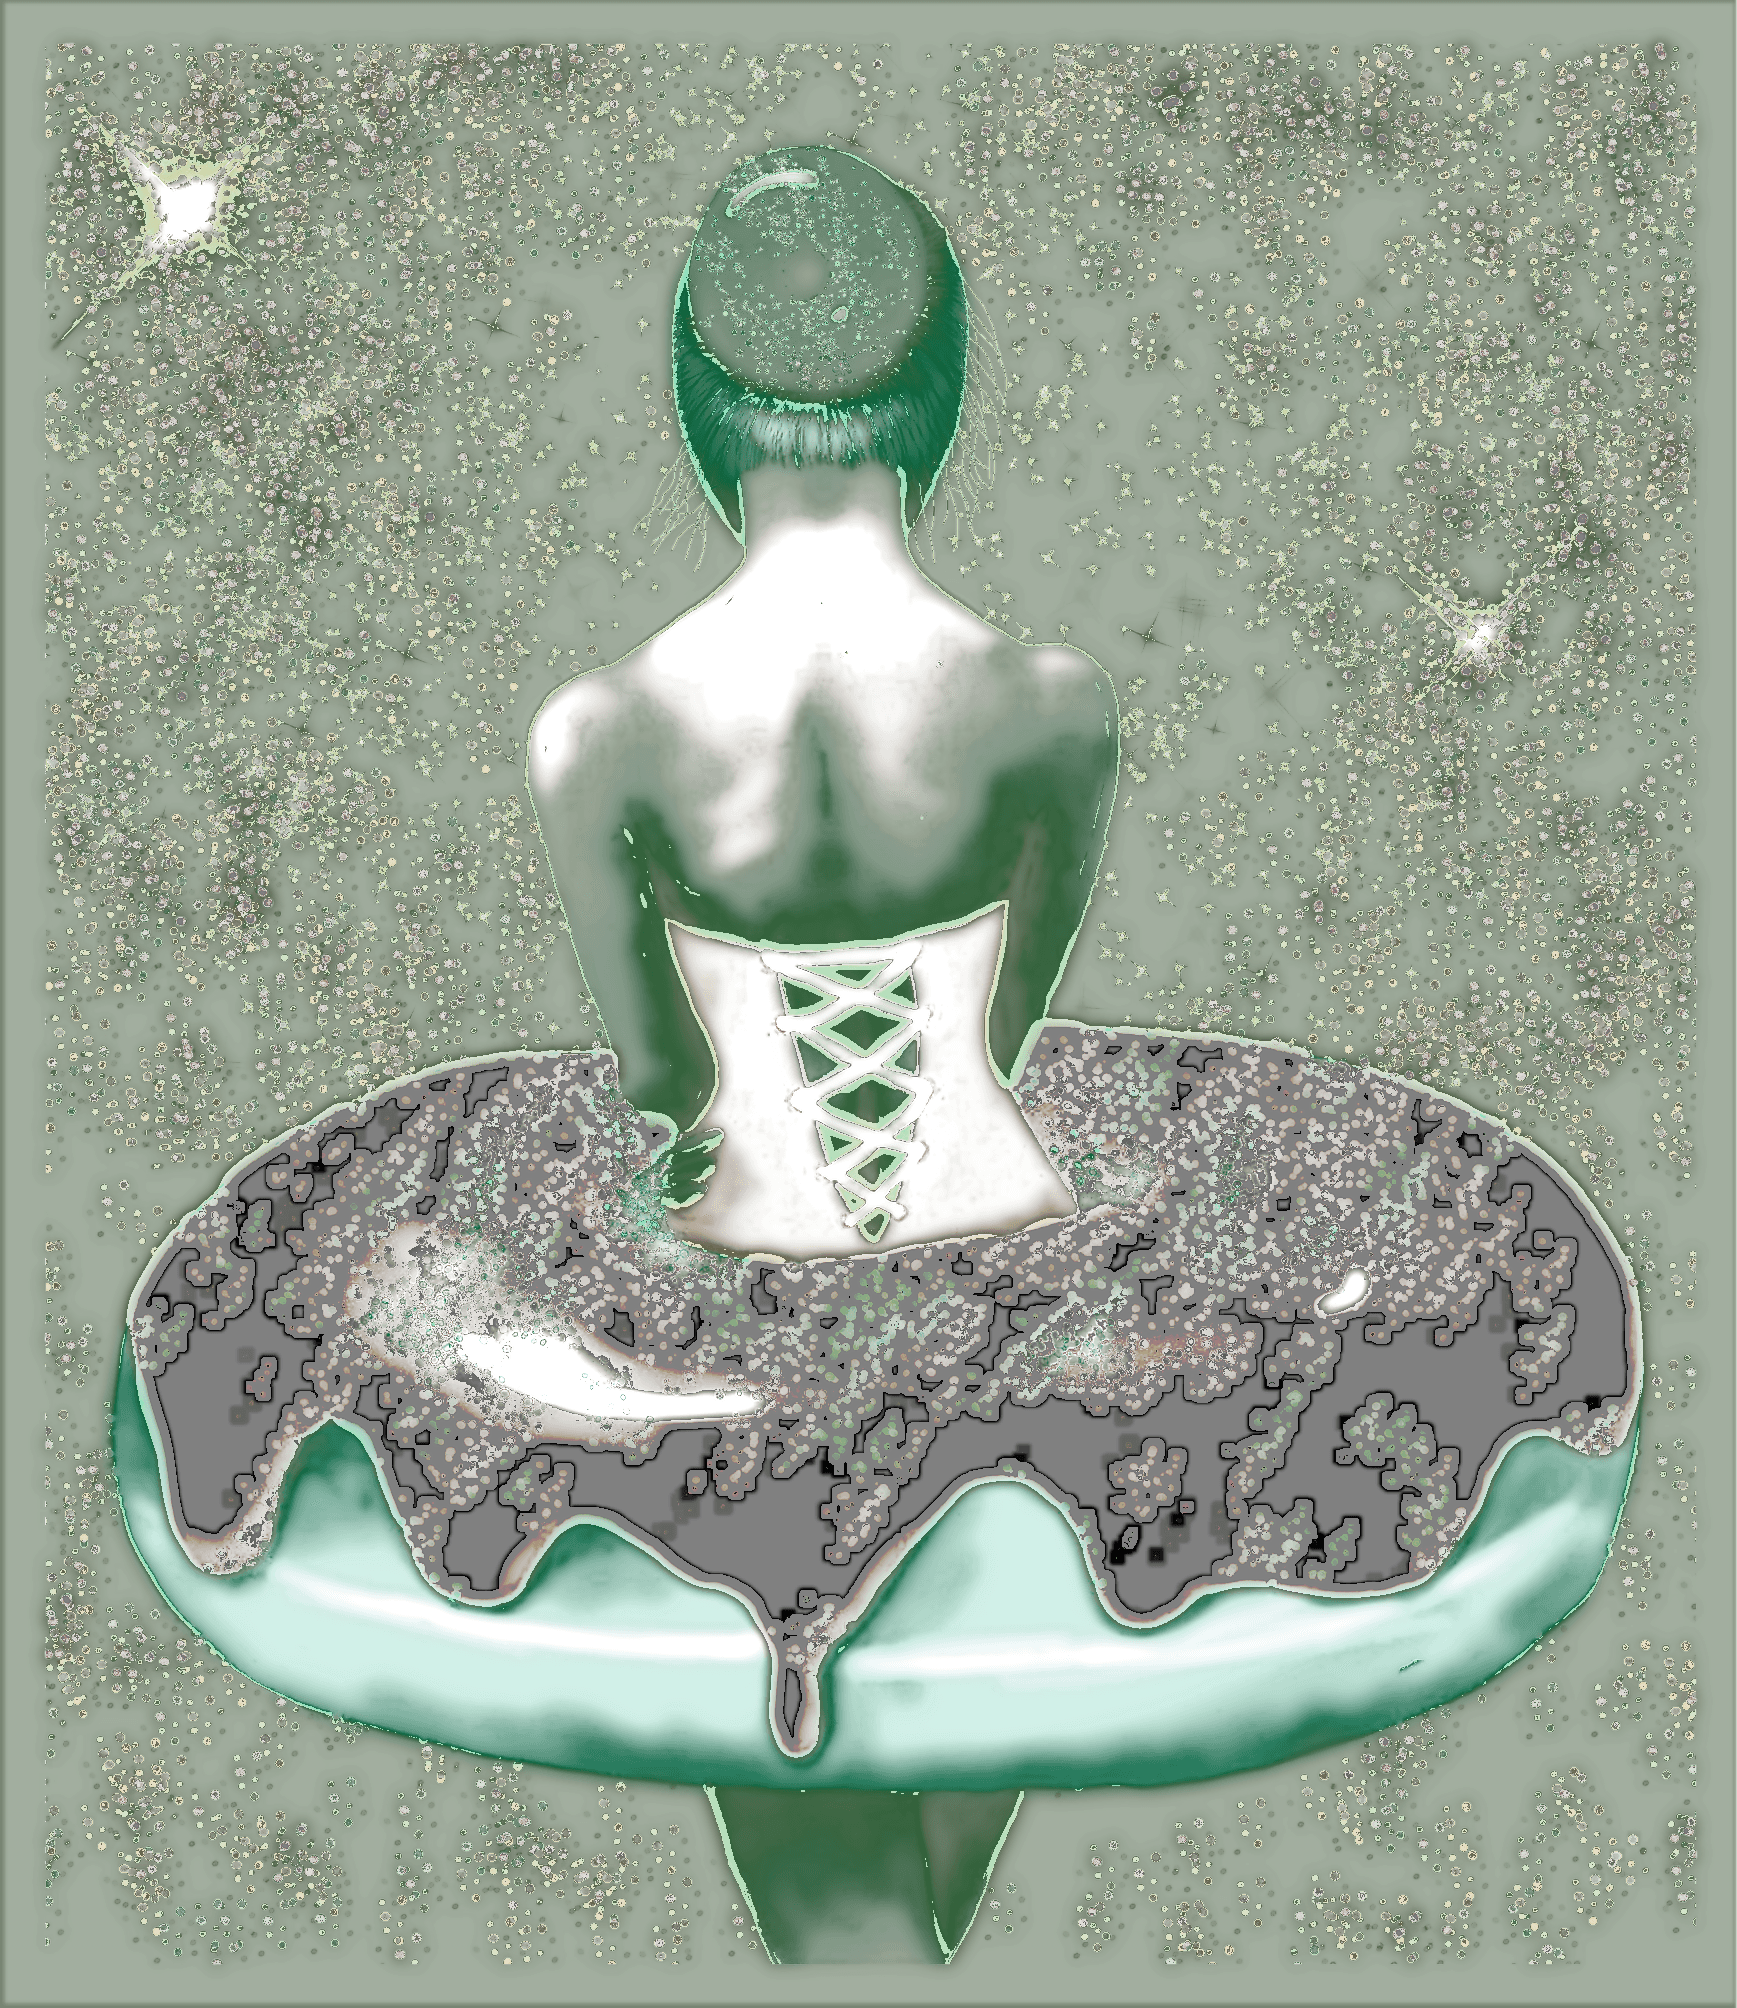 Donut Ballerina In Blue Transformed WIth Relief - Again